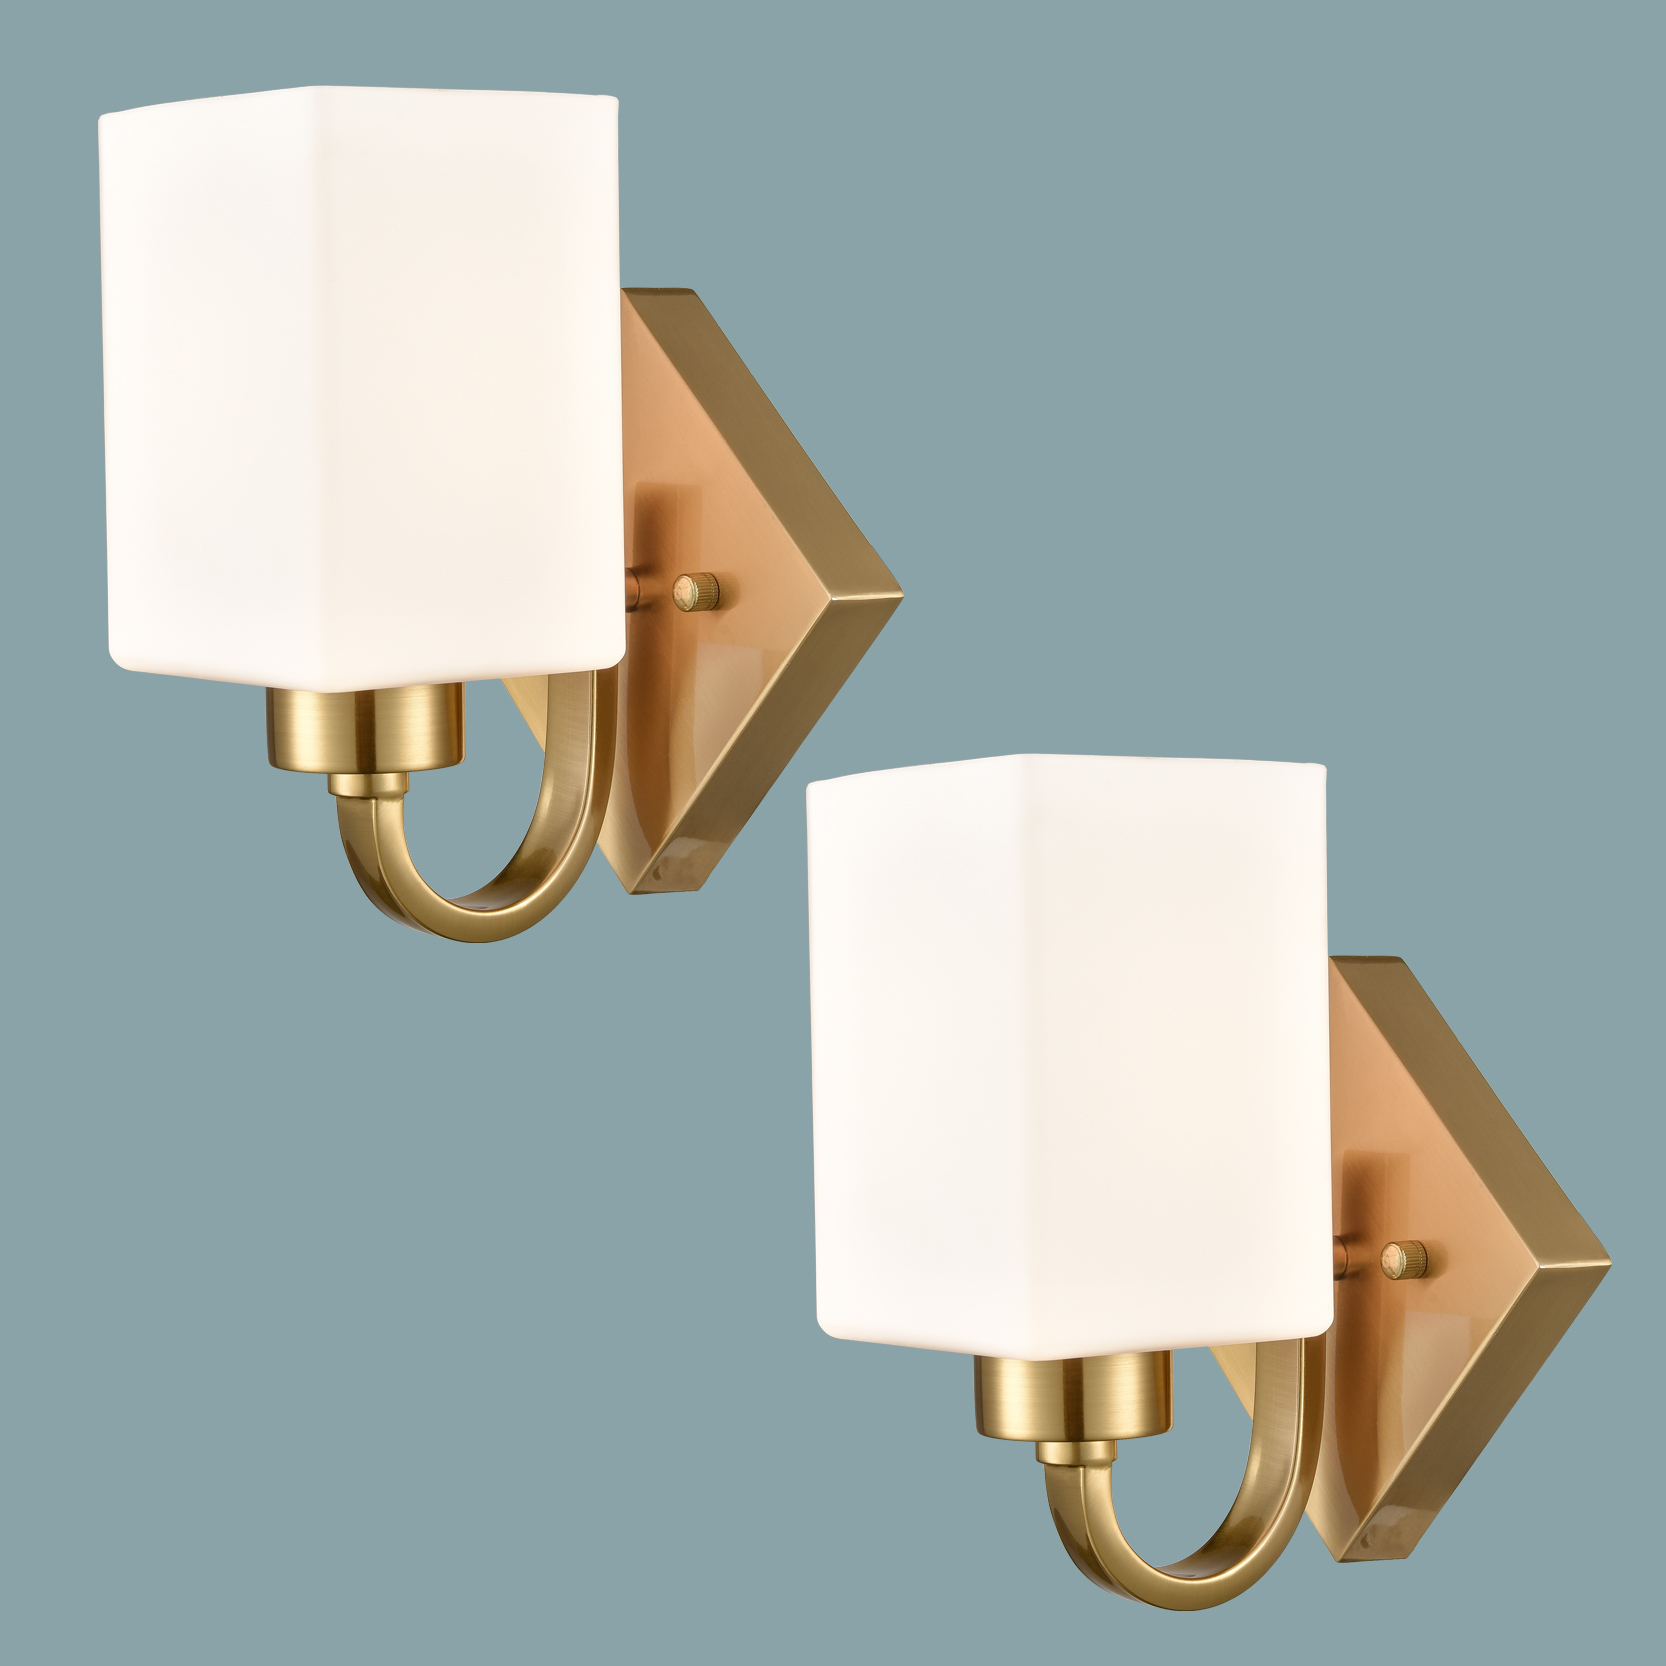 Modern Set of 2 Square Brass Gold Wall Light Fixtures For Bathroom